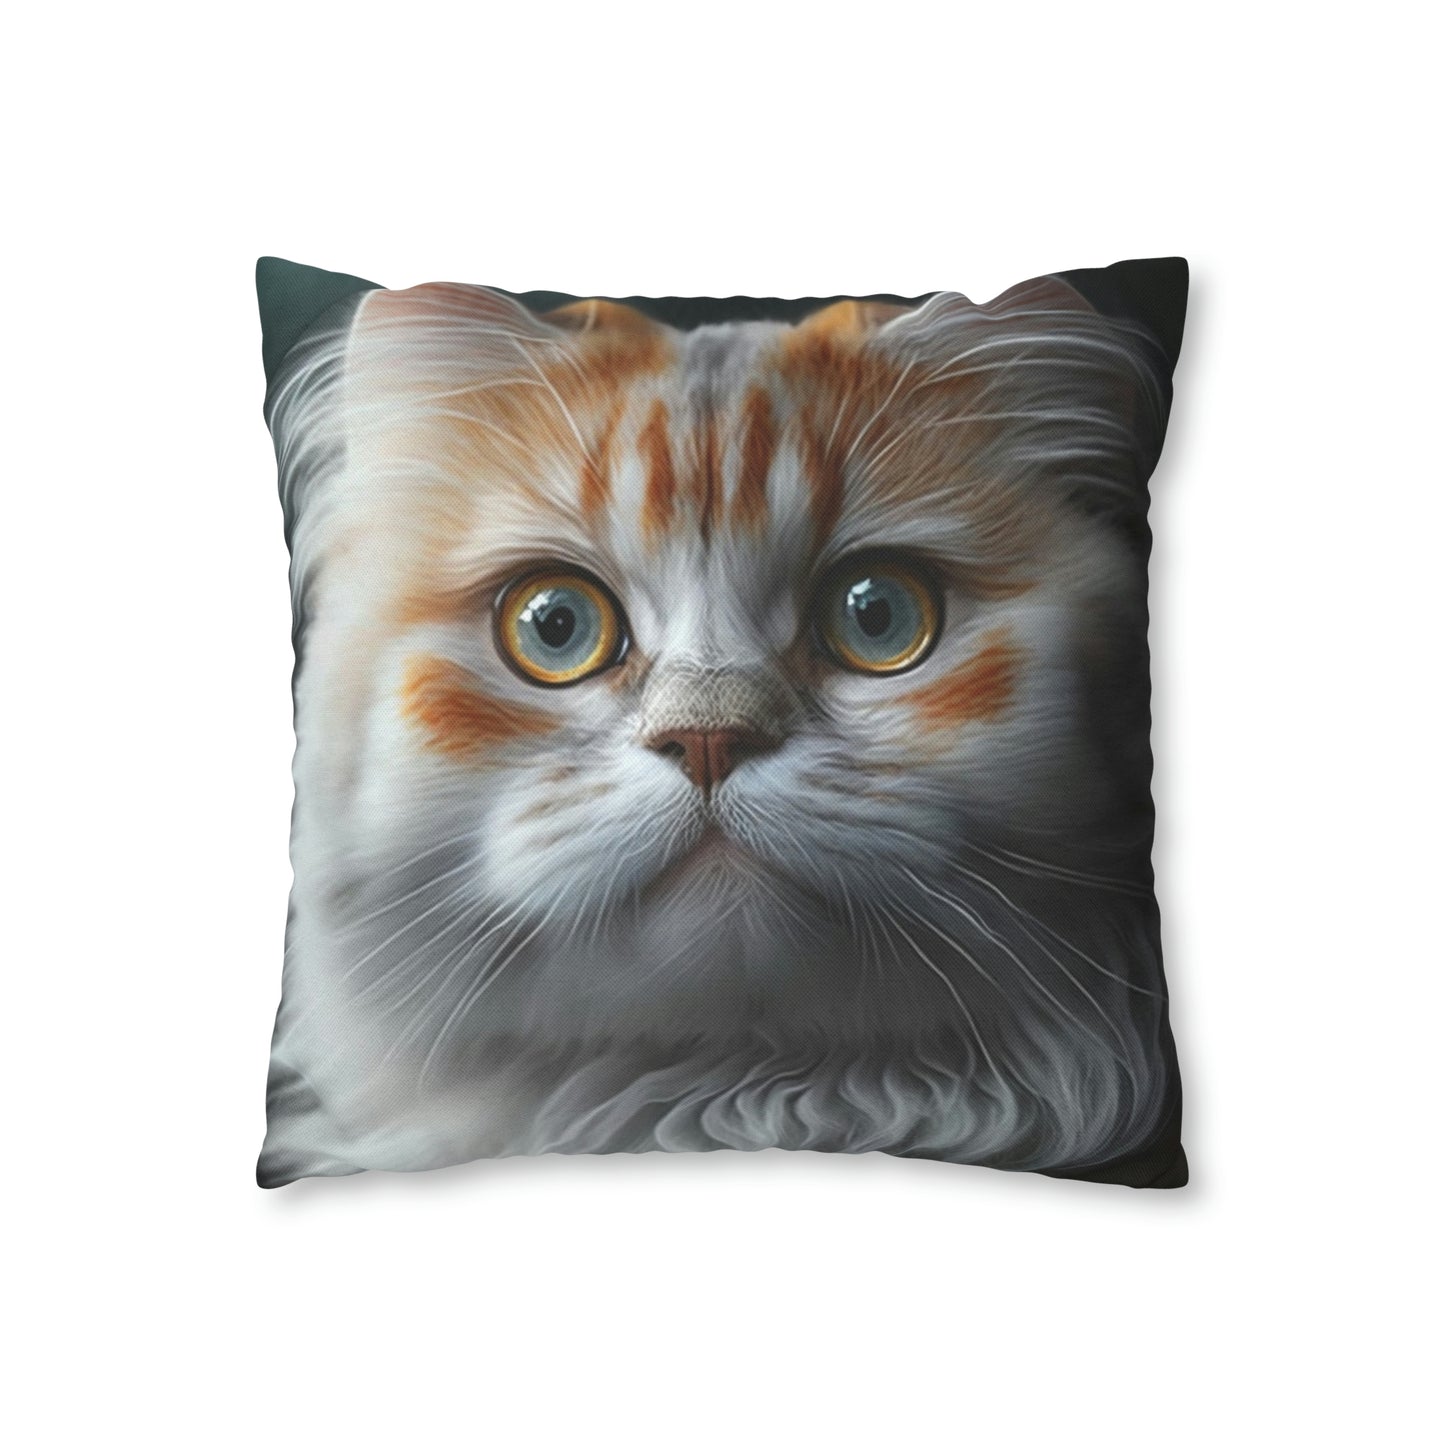 Cat PillowCase Square Faux Suede Beautiful High Quality Spun Polyester Square Cat PillowCase